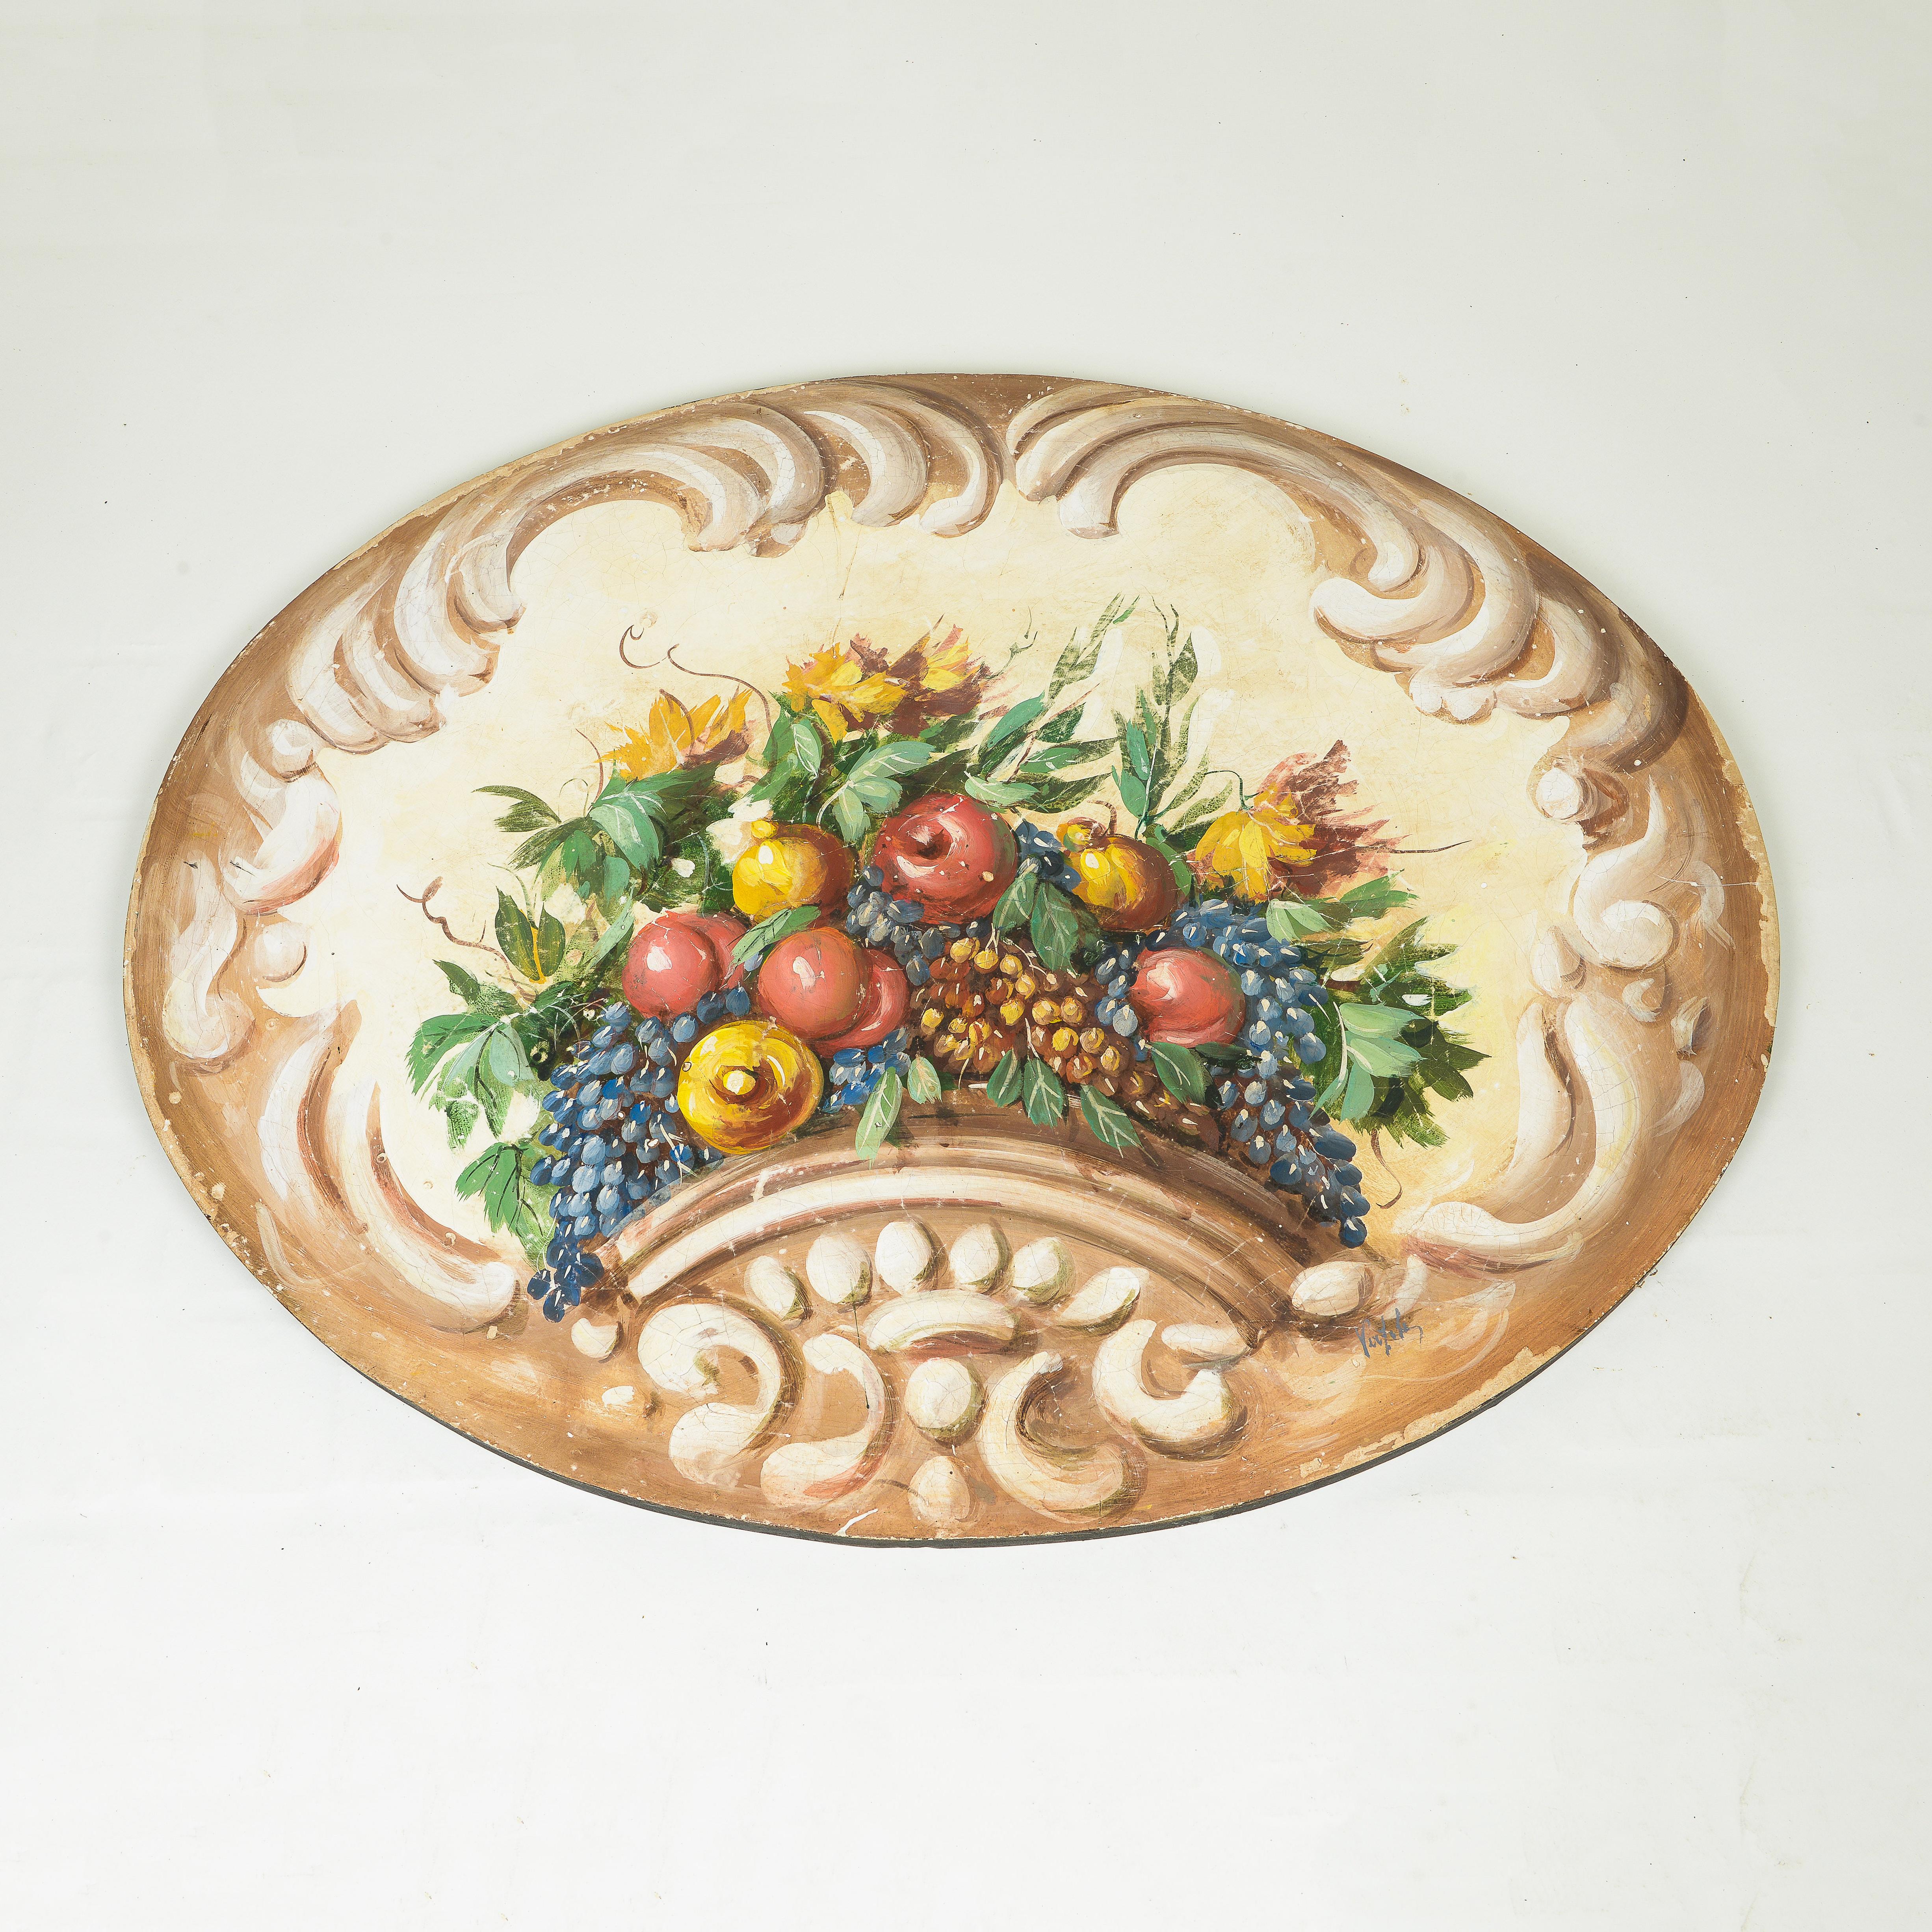 Unknown Still-Life Painting - An Italian Decorative Oval Panel of Fruit and Flowers